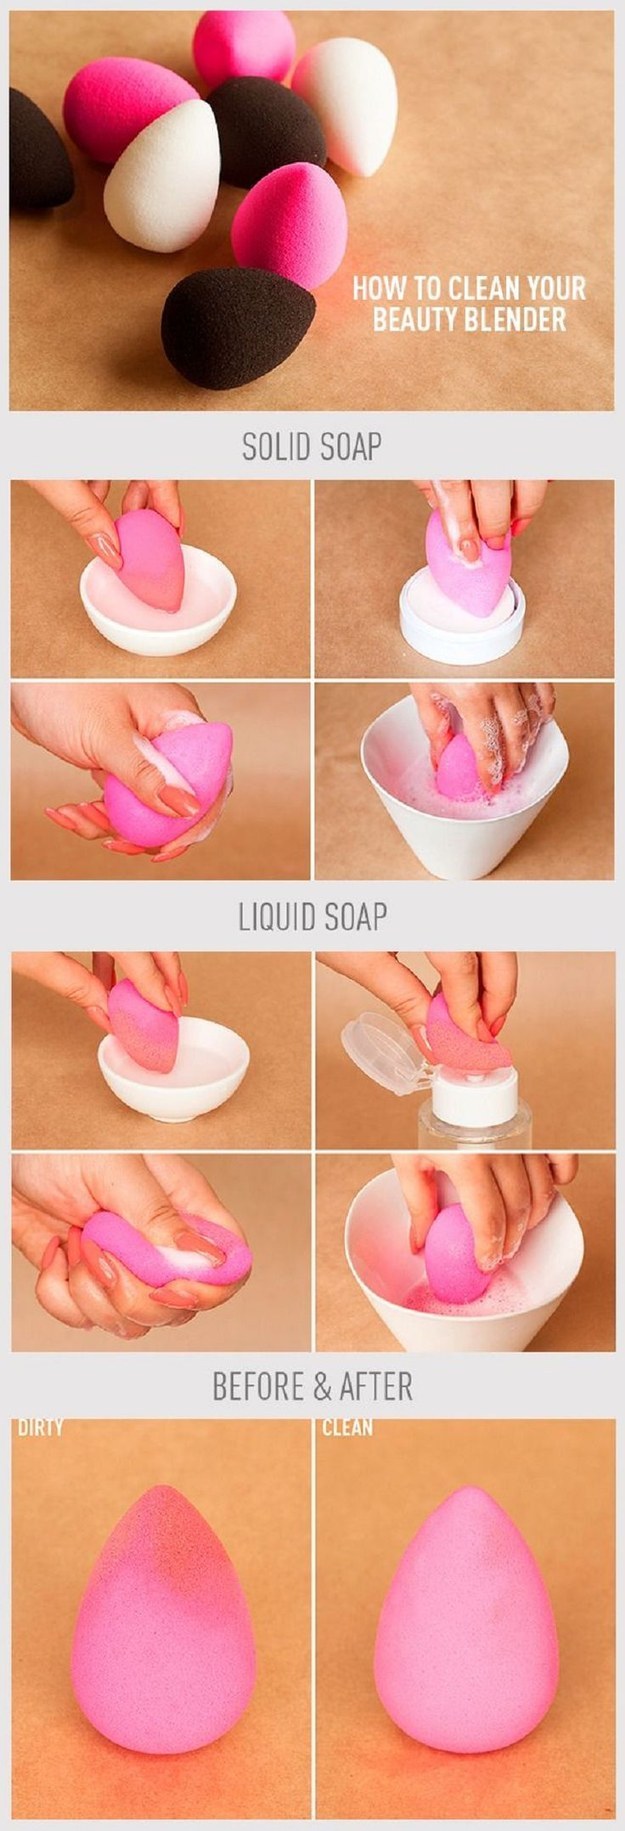 How to Clean Your Beauty Blender